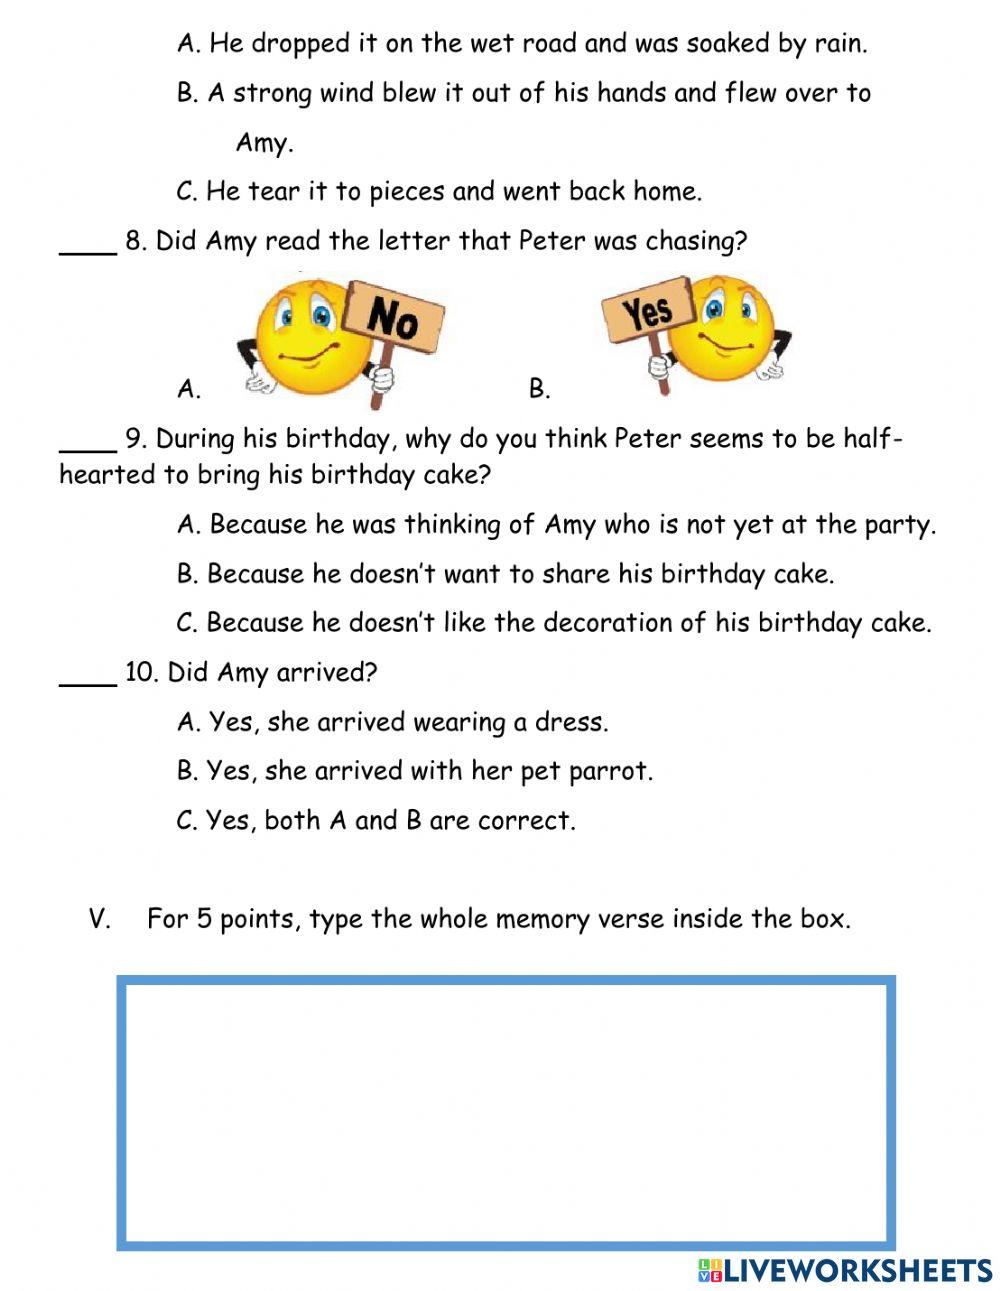 ESP-CL (KINDER) - LESSON 3 QUIZ: THE EXCITING LETTER